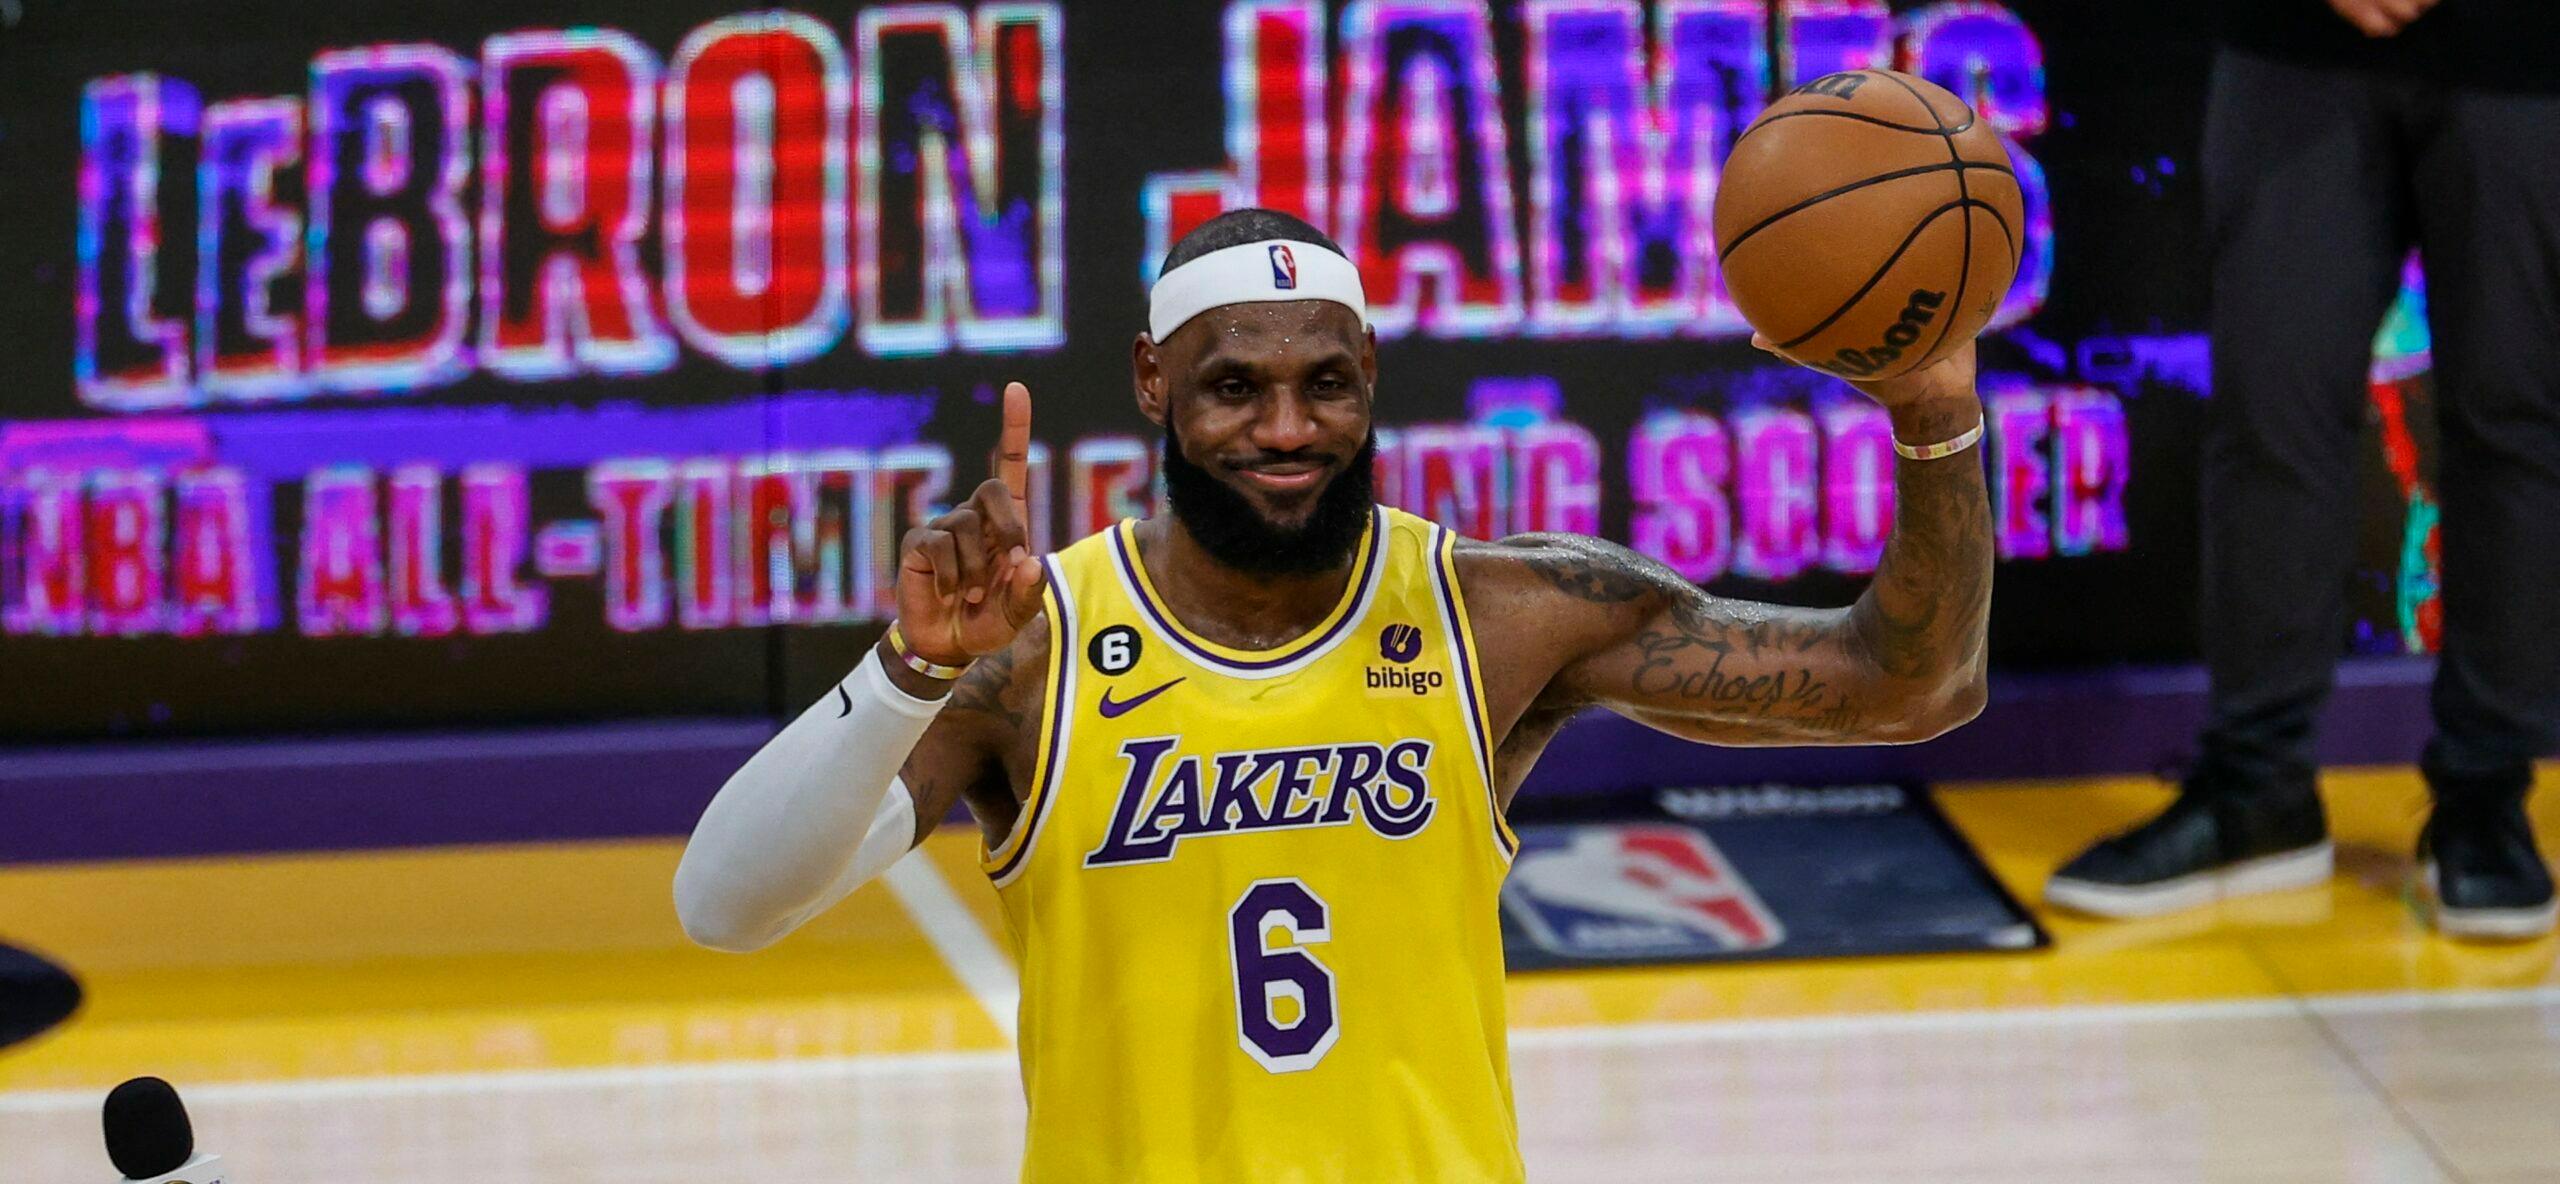 LeBron James Becomes Highest-Scoring NBA Player of All Time